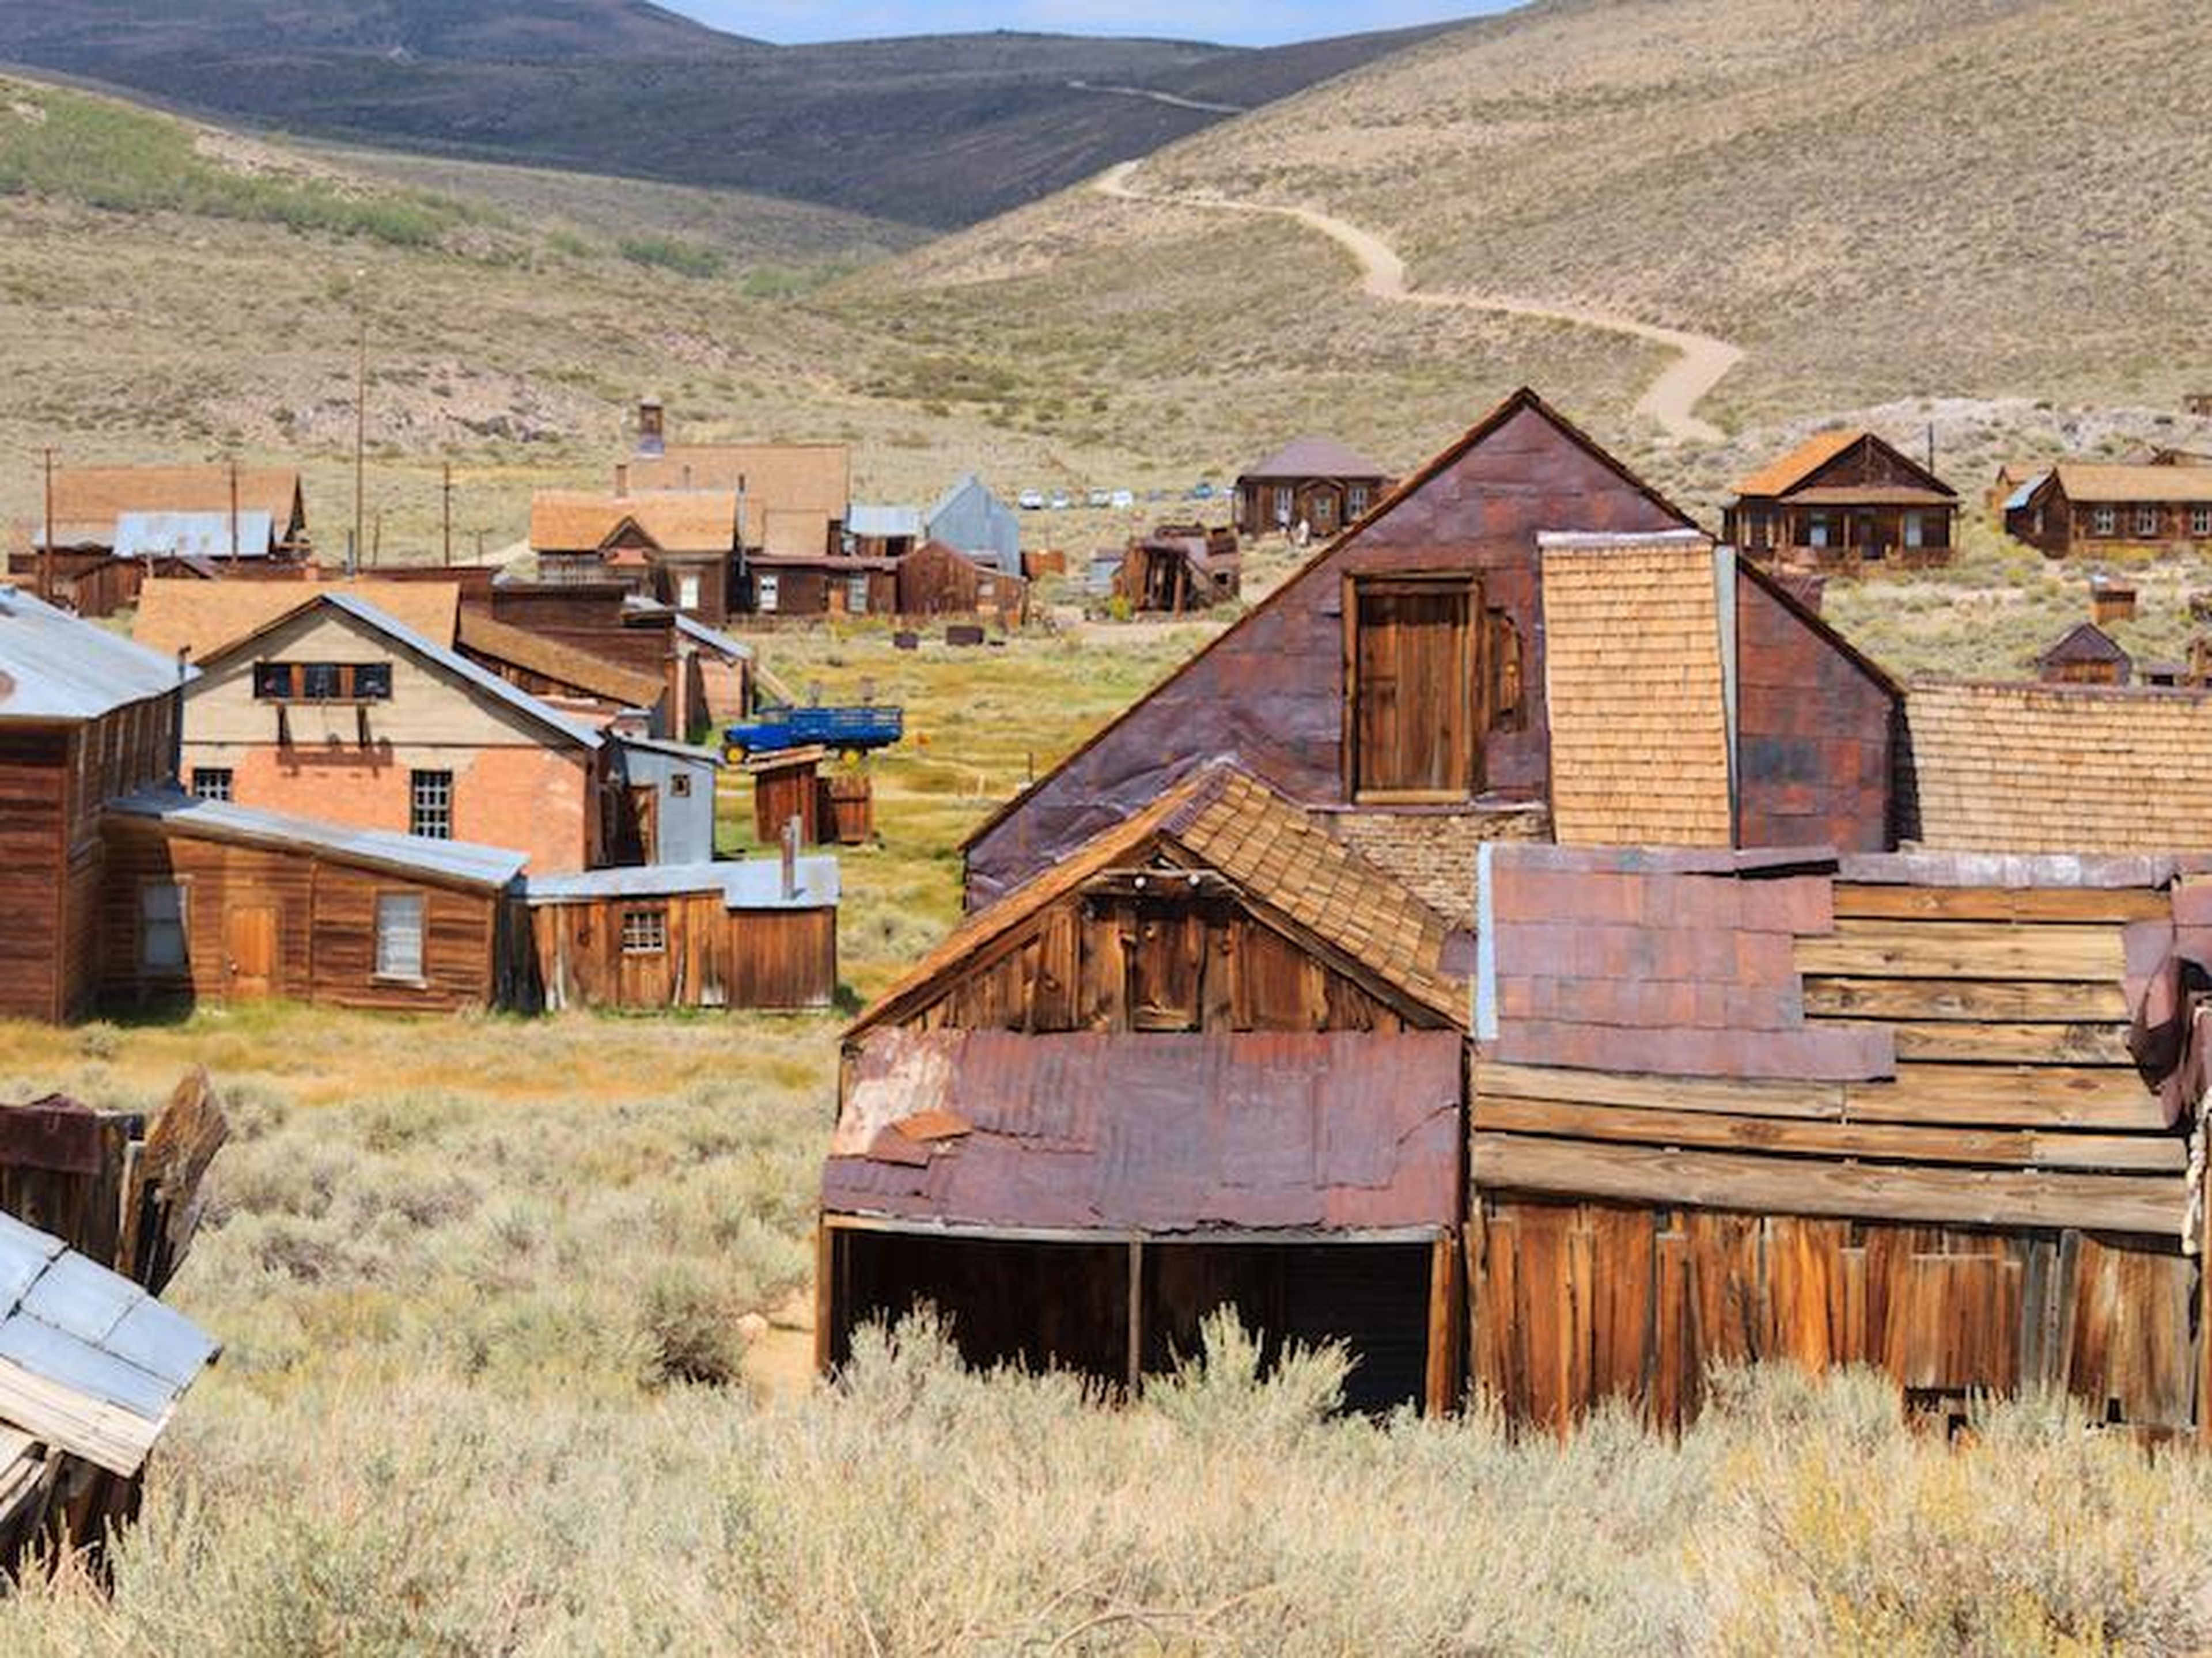 This ghost town will take you back to the Wild West.